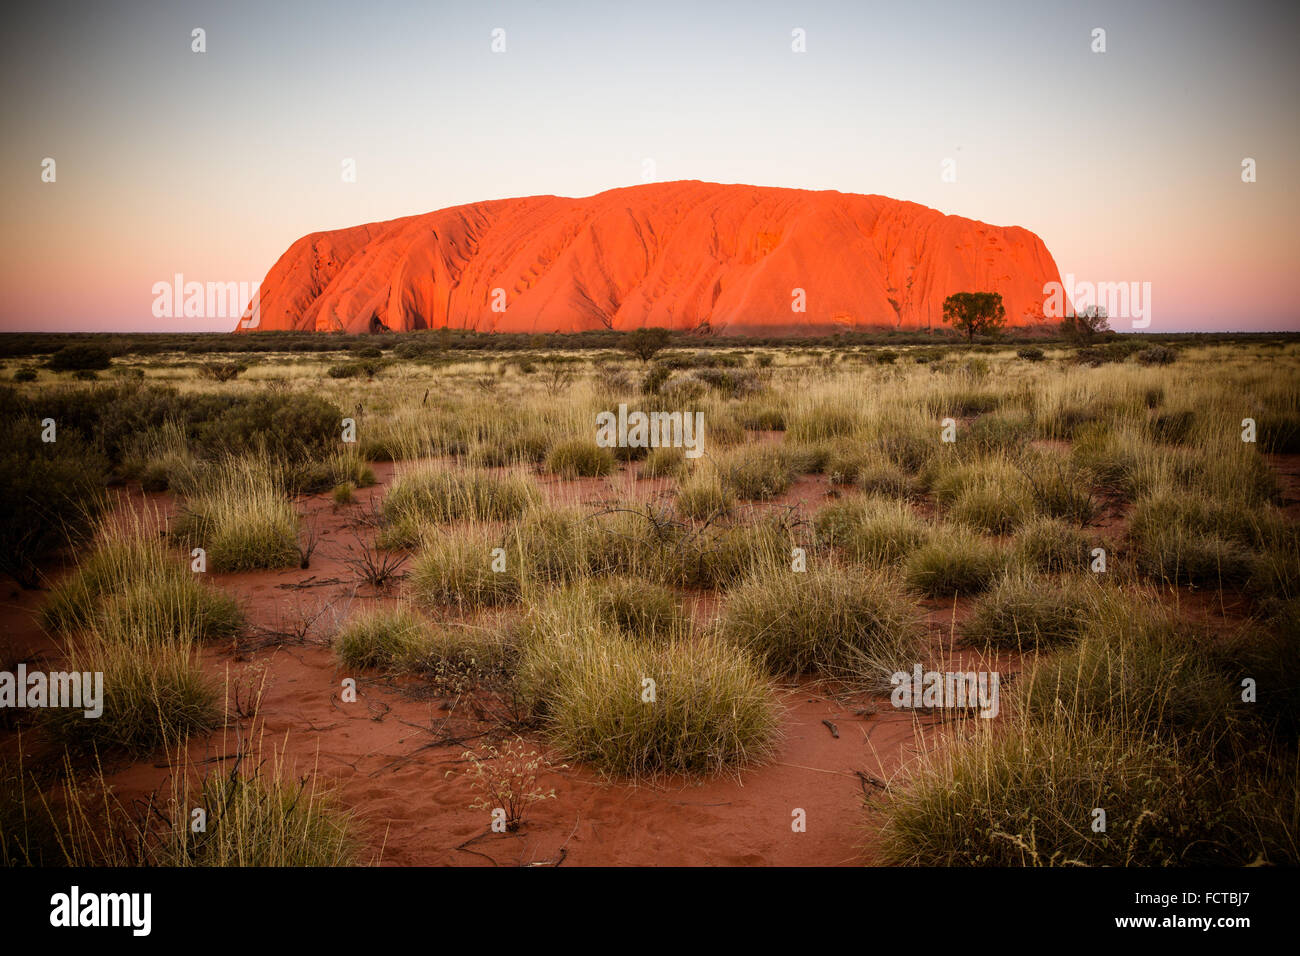 Majestic Uluru at sunset on a clear winter's evening in the Northern Territory, Australia Stock Photo